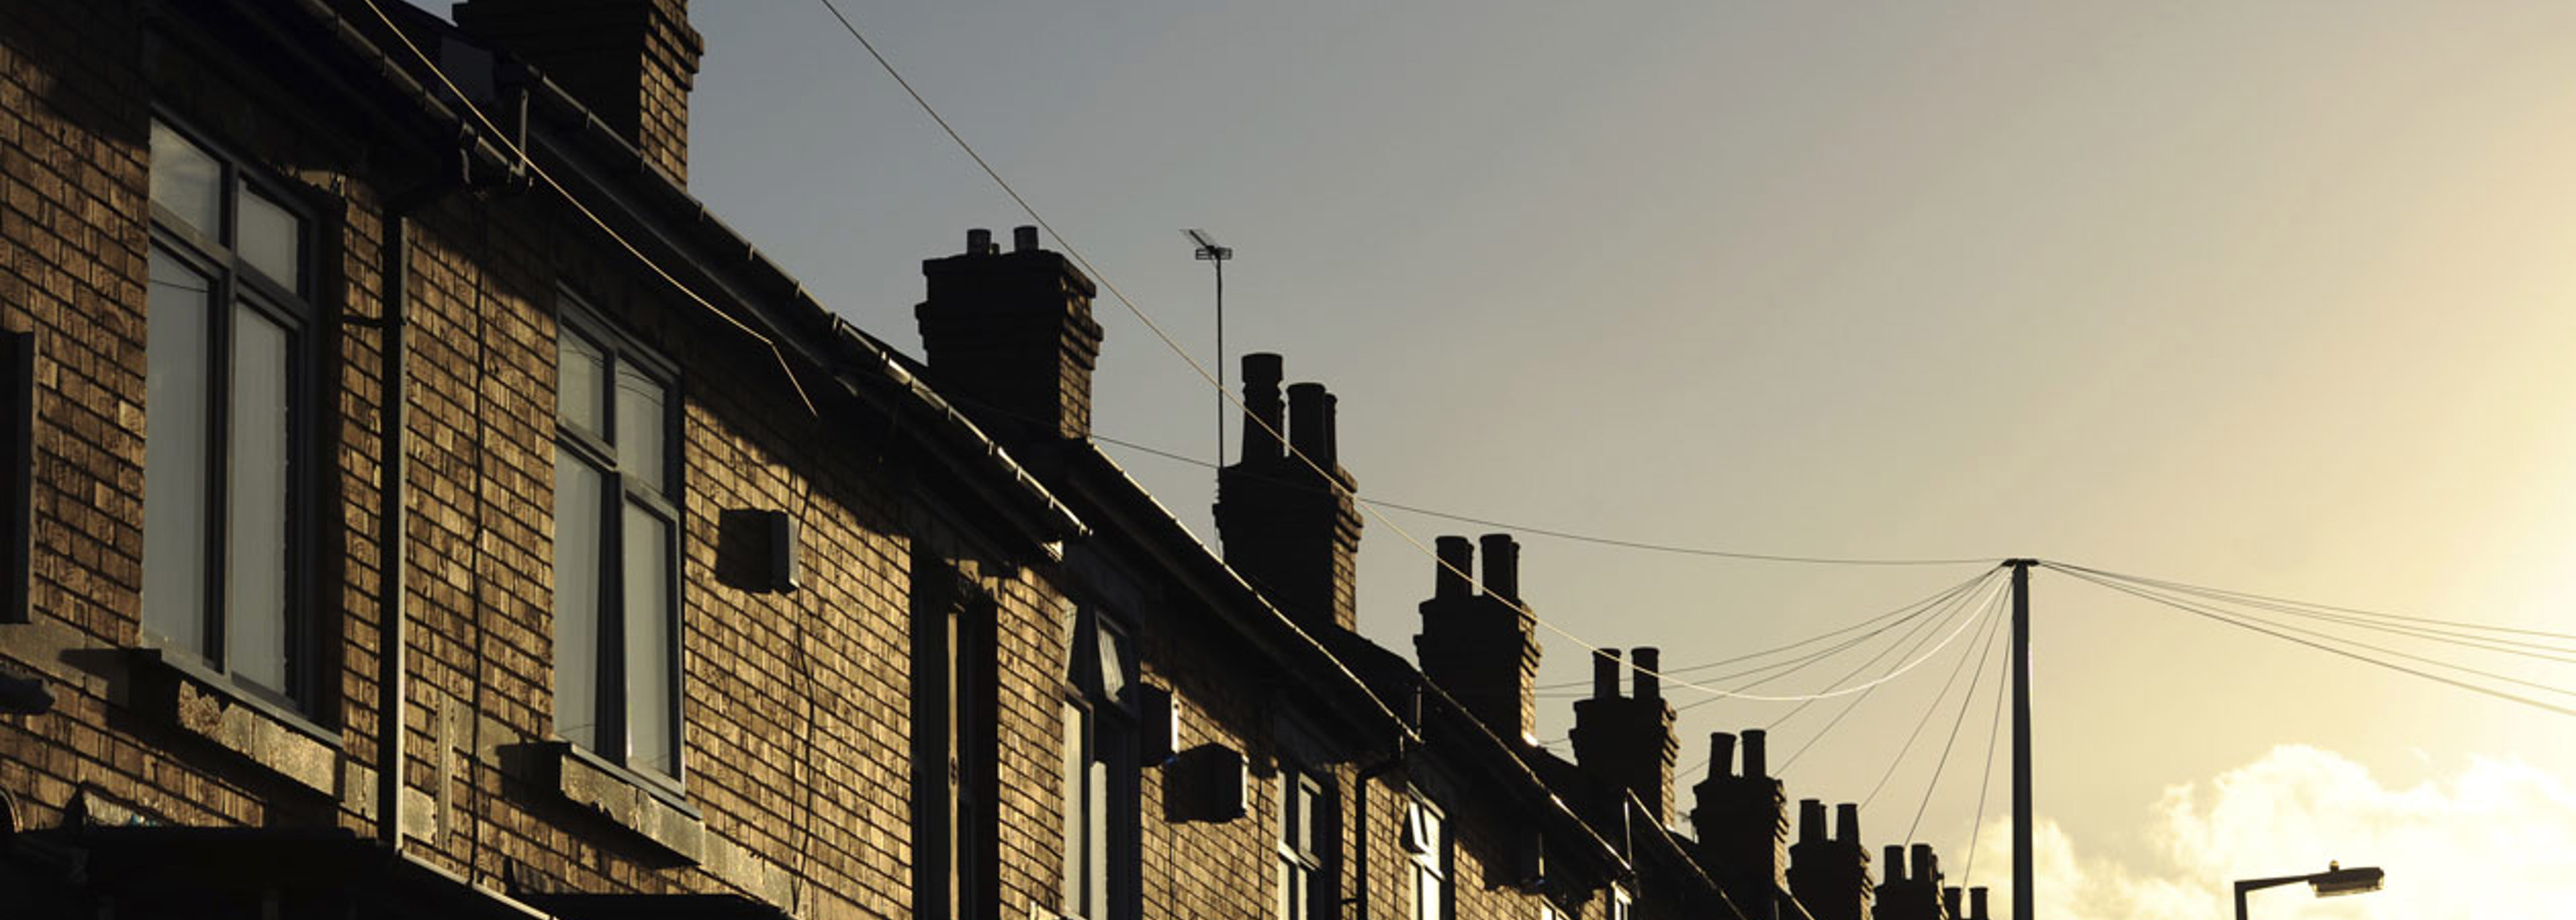 Licensing does improve housing standards